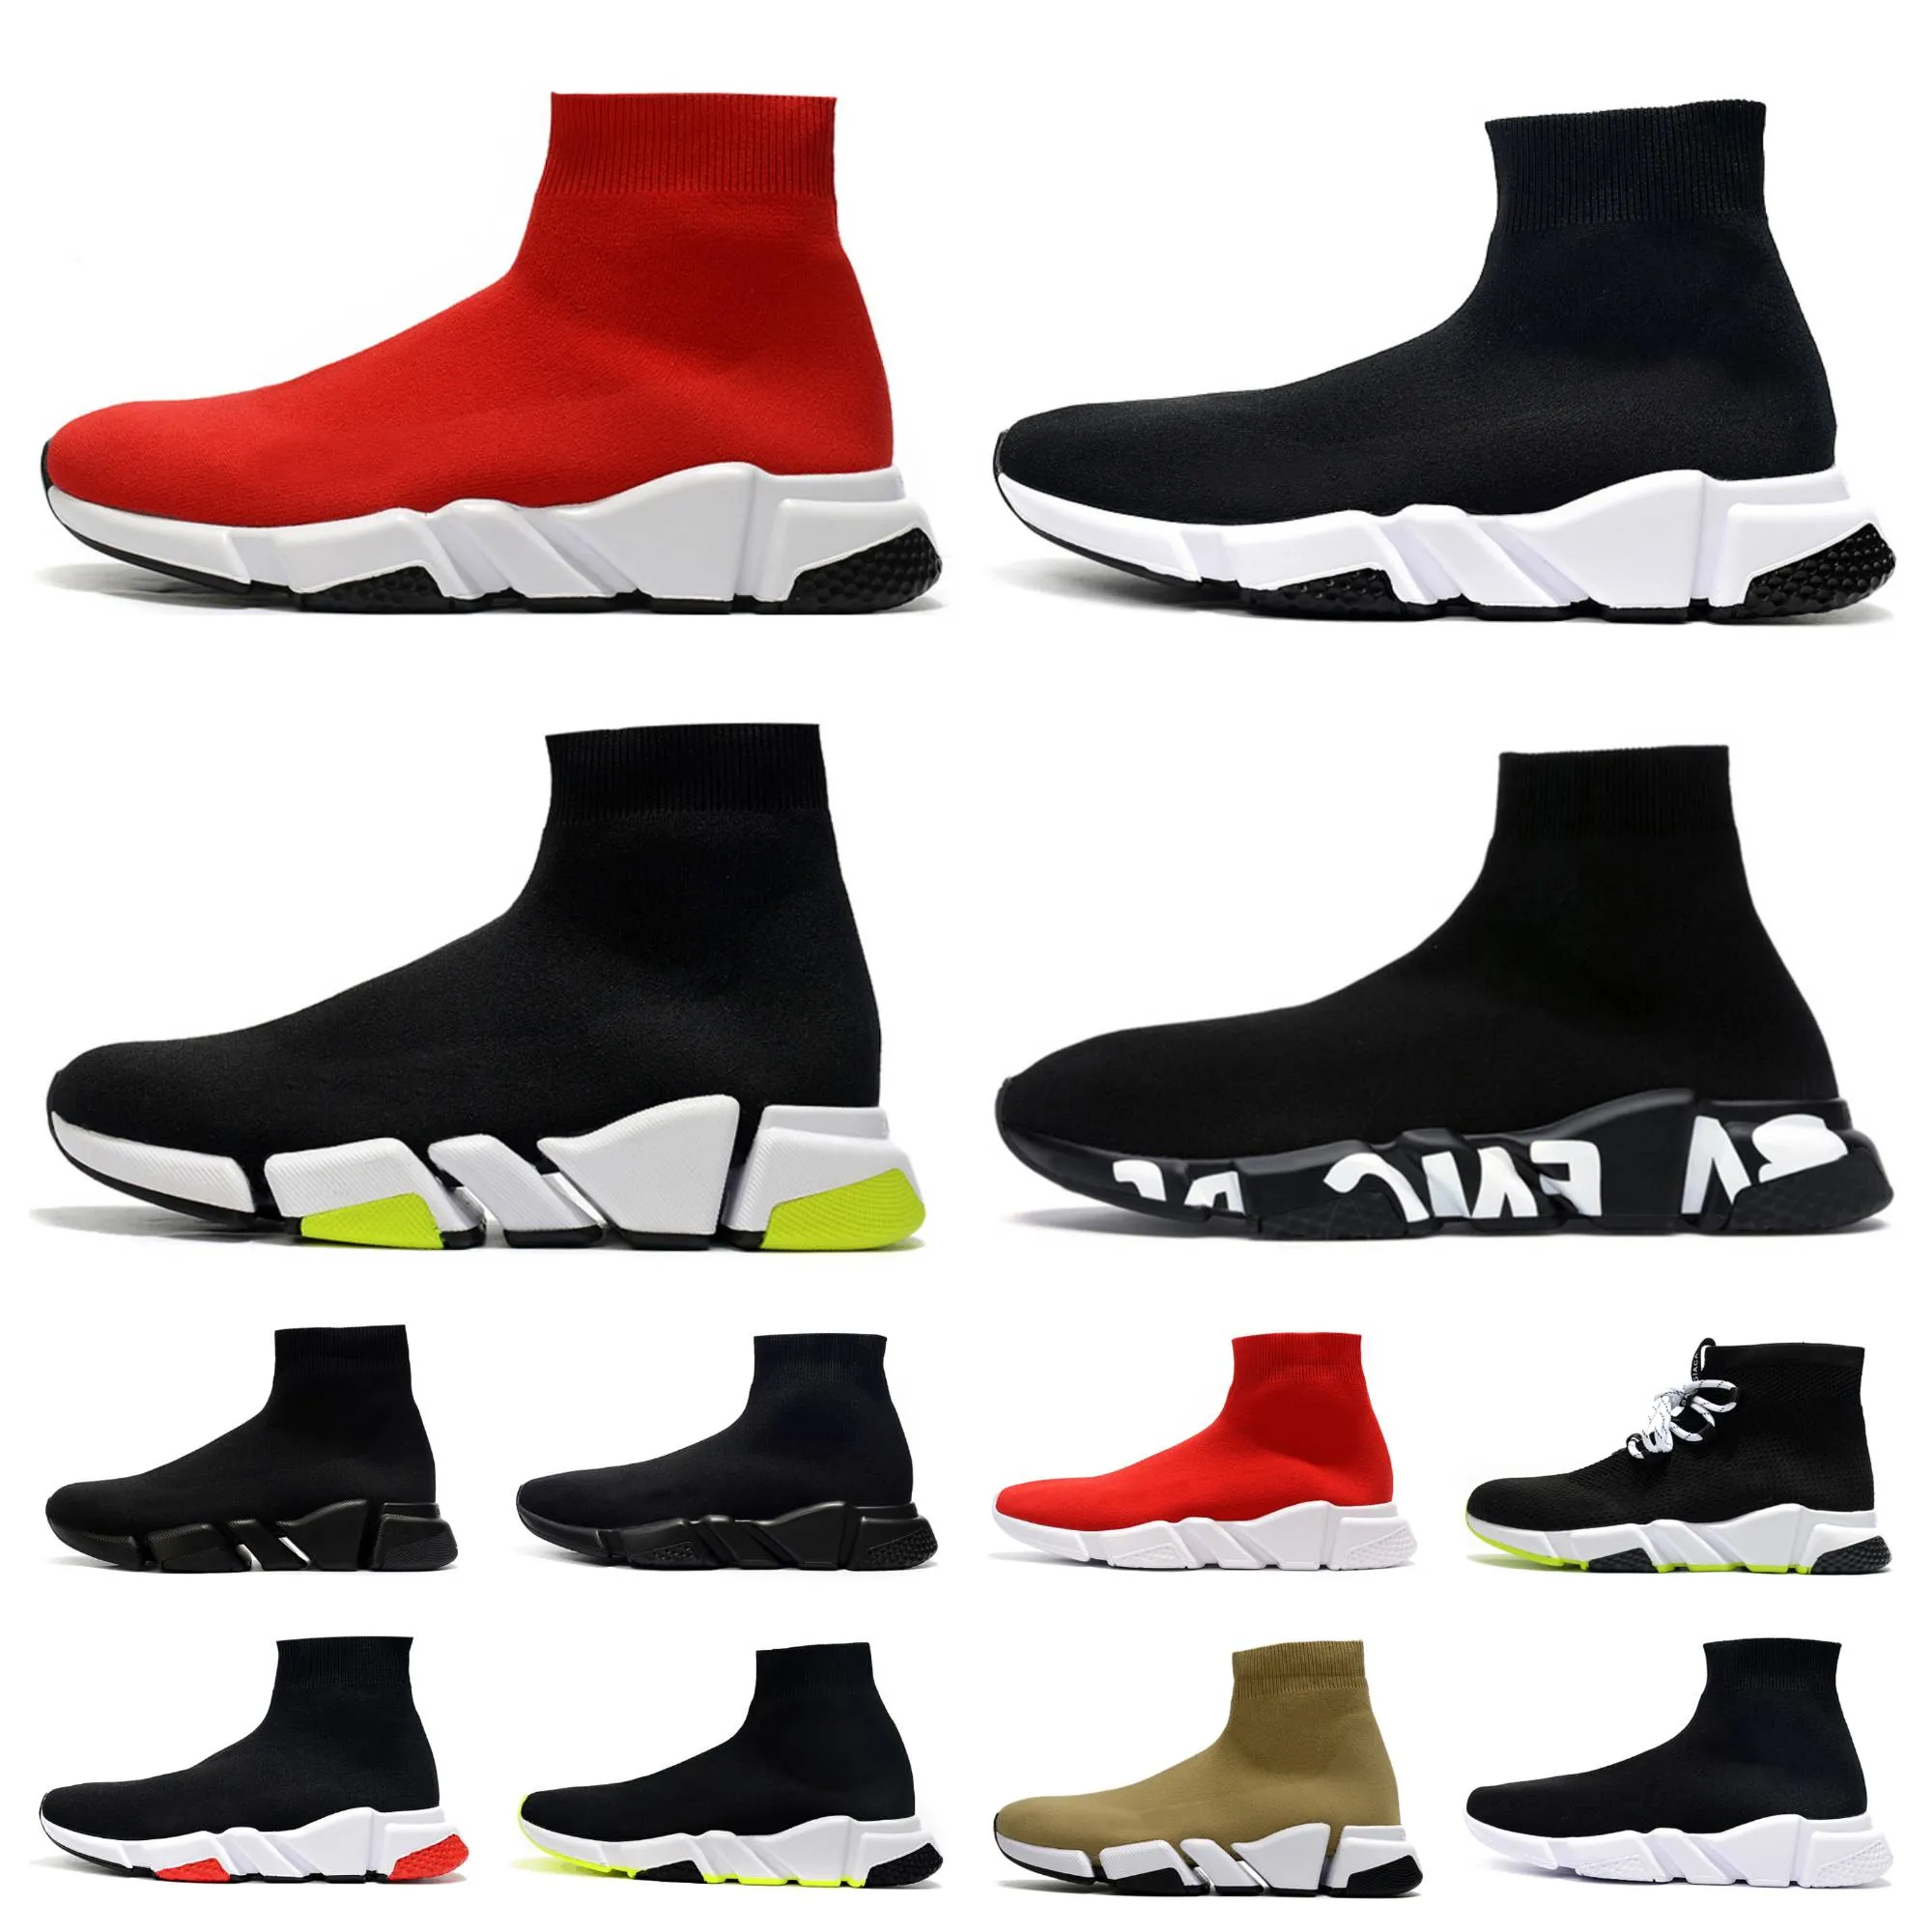 Sock Shoes Designer Mens Casual Shoes Womens Speed ​​Trainer Socks Boot Speed ​​Shoe Runners Runner Sneakers Knit Women 1.0 2.0 Walking Triple Black White Red Spets Sports